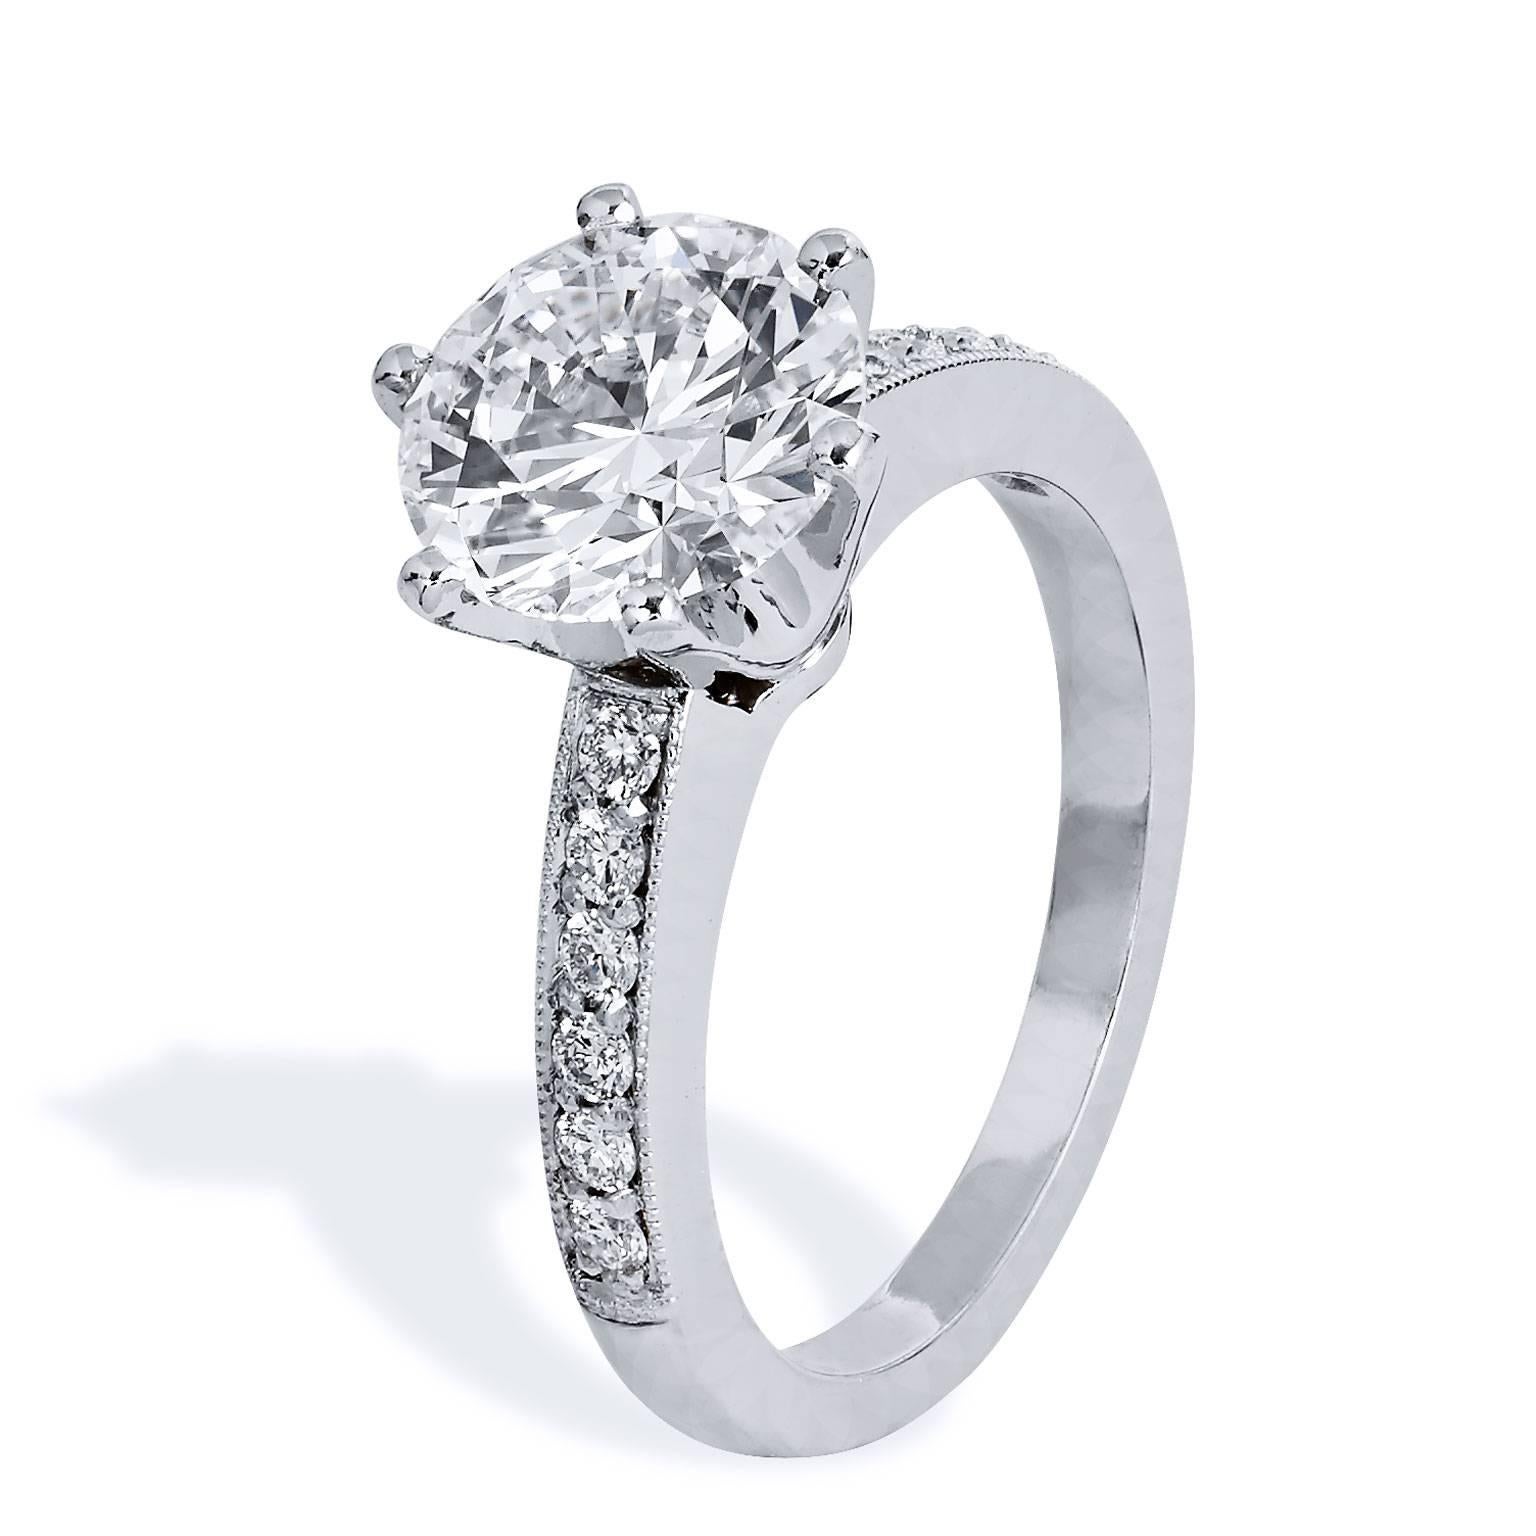 A monumental moment in life is deserving of a monumental ring. This H and H handmade platinum engagement ring features a stunning 2.52 carat GIA certified diamond graded E/WS2 at center, complemented by 0.24 carat of pave set diamond sweeping the